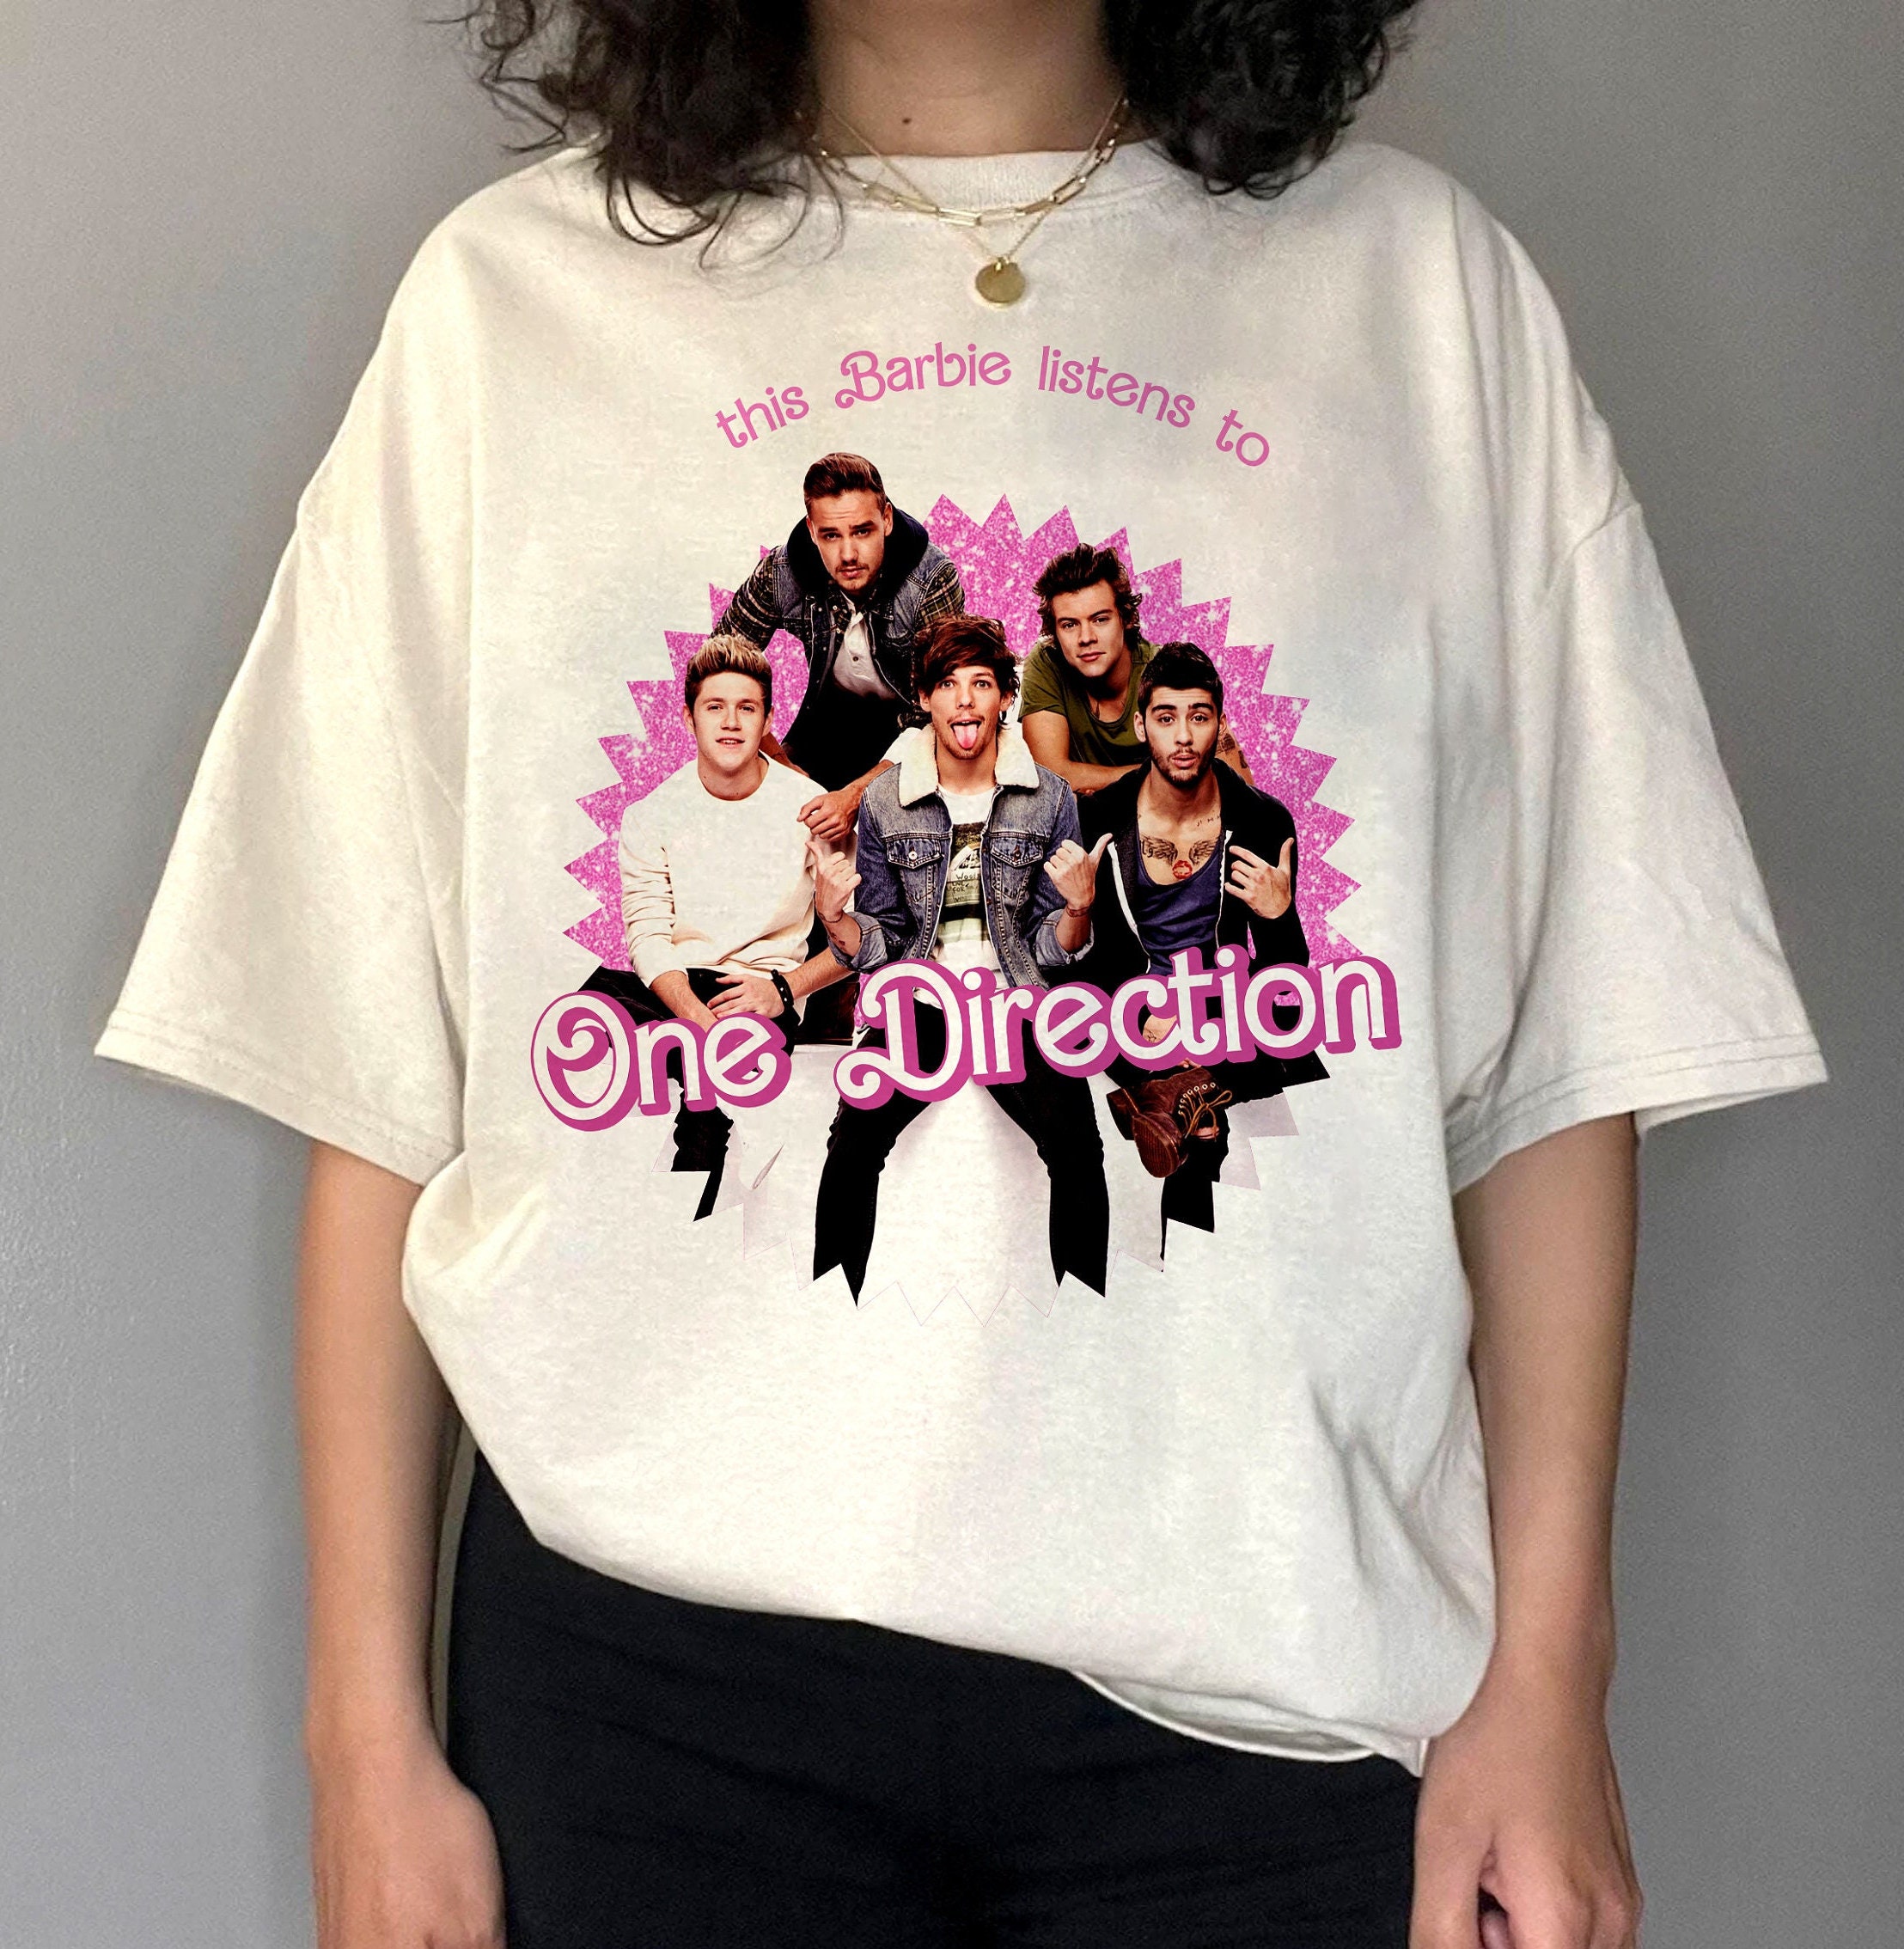 Pin by timeawaits on 1D merch  One direction shirts, One direction t  shirts, One direction outfits